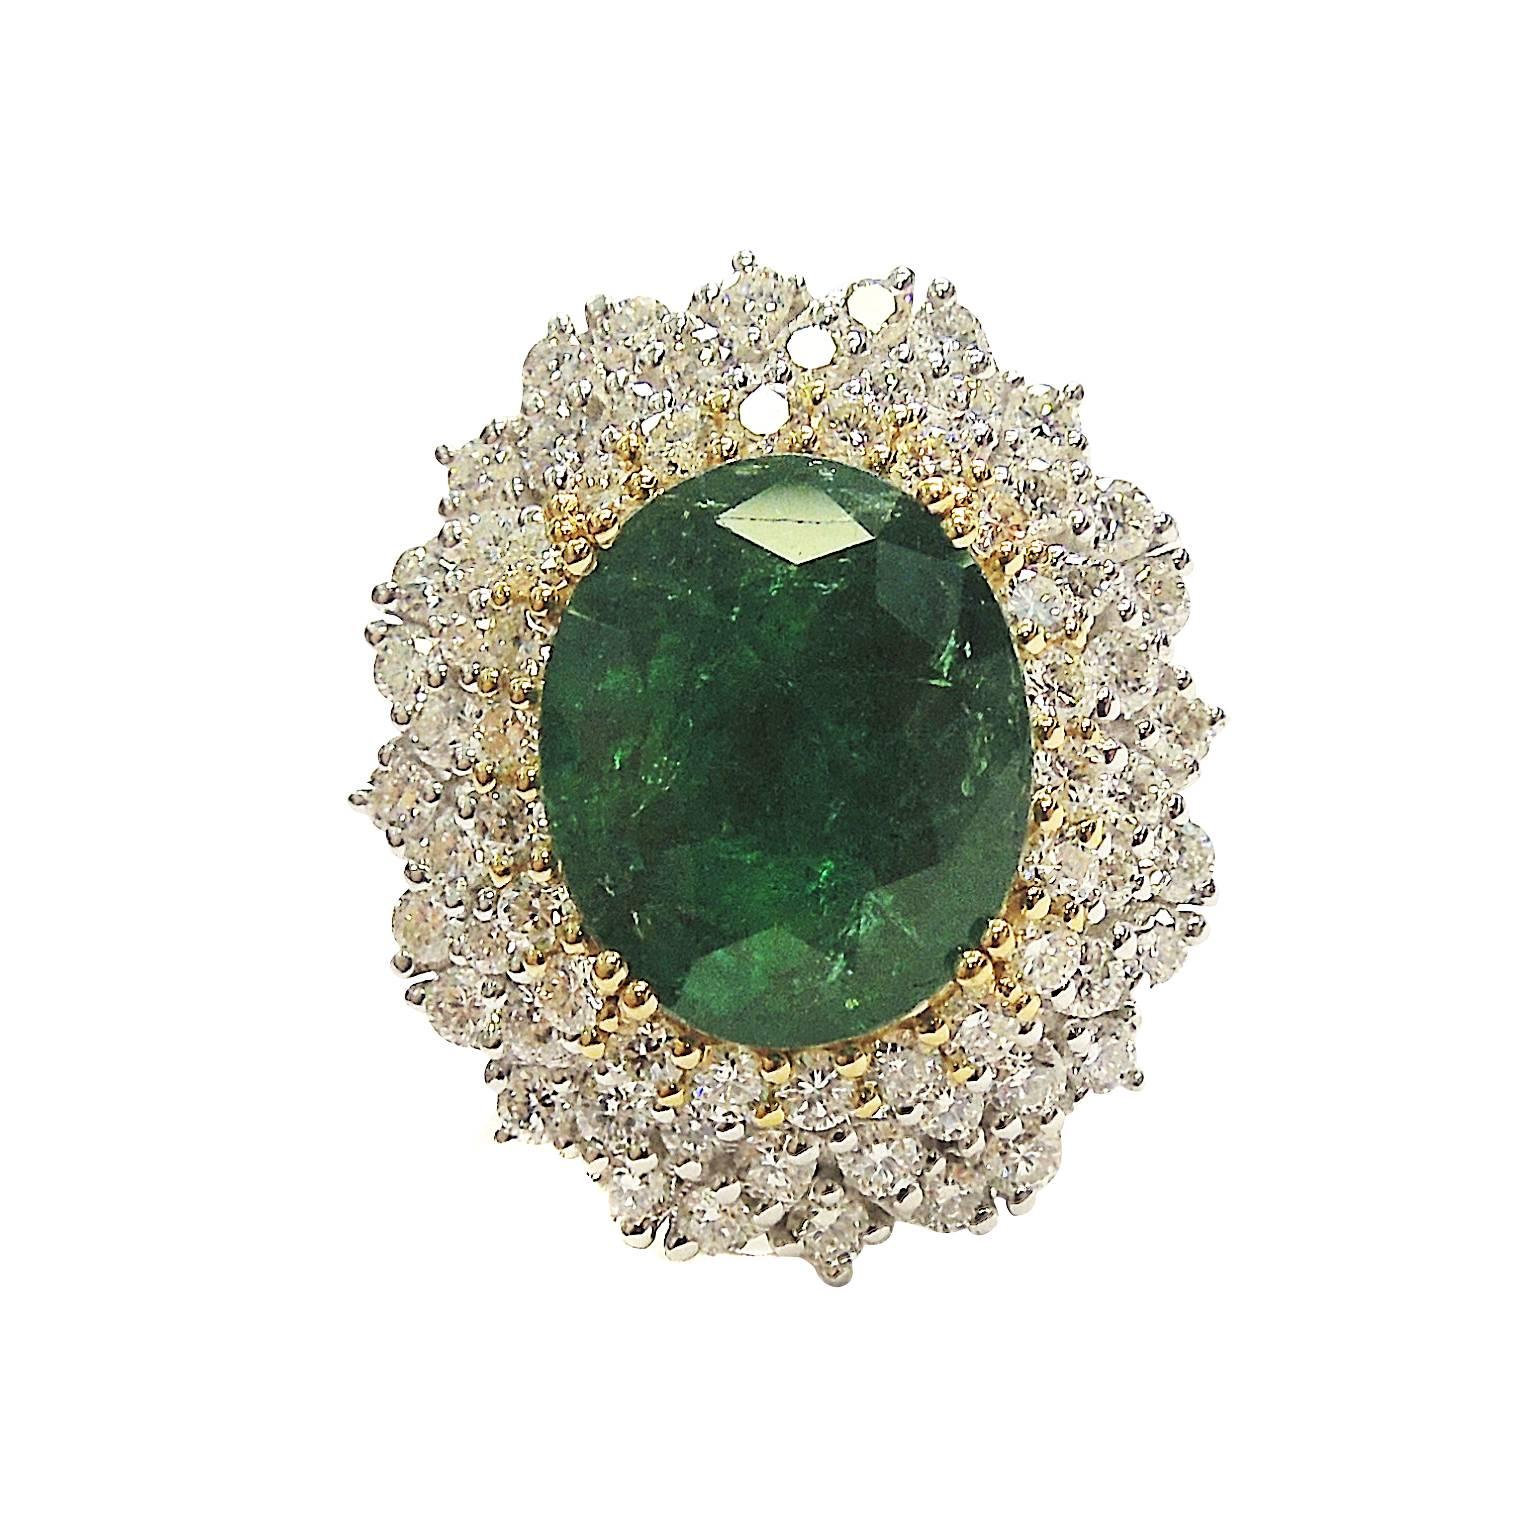 18K White Gold Ring with Oval Shape Emerald Center and Diamonds

Center Oval Shape Emerald, 5.03ct.

1.75ct. H Color Diamonds

Face of ring is 1 inch x 0.8 inch

Currently size 5. Can be sized.